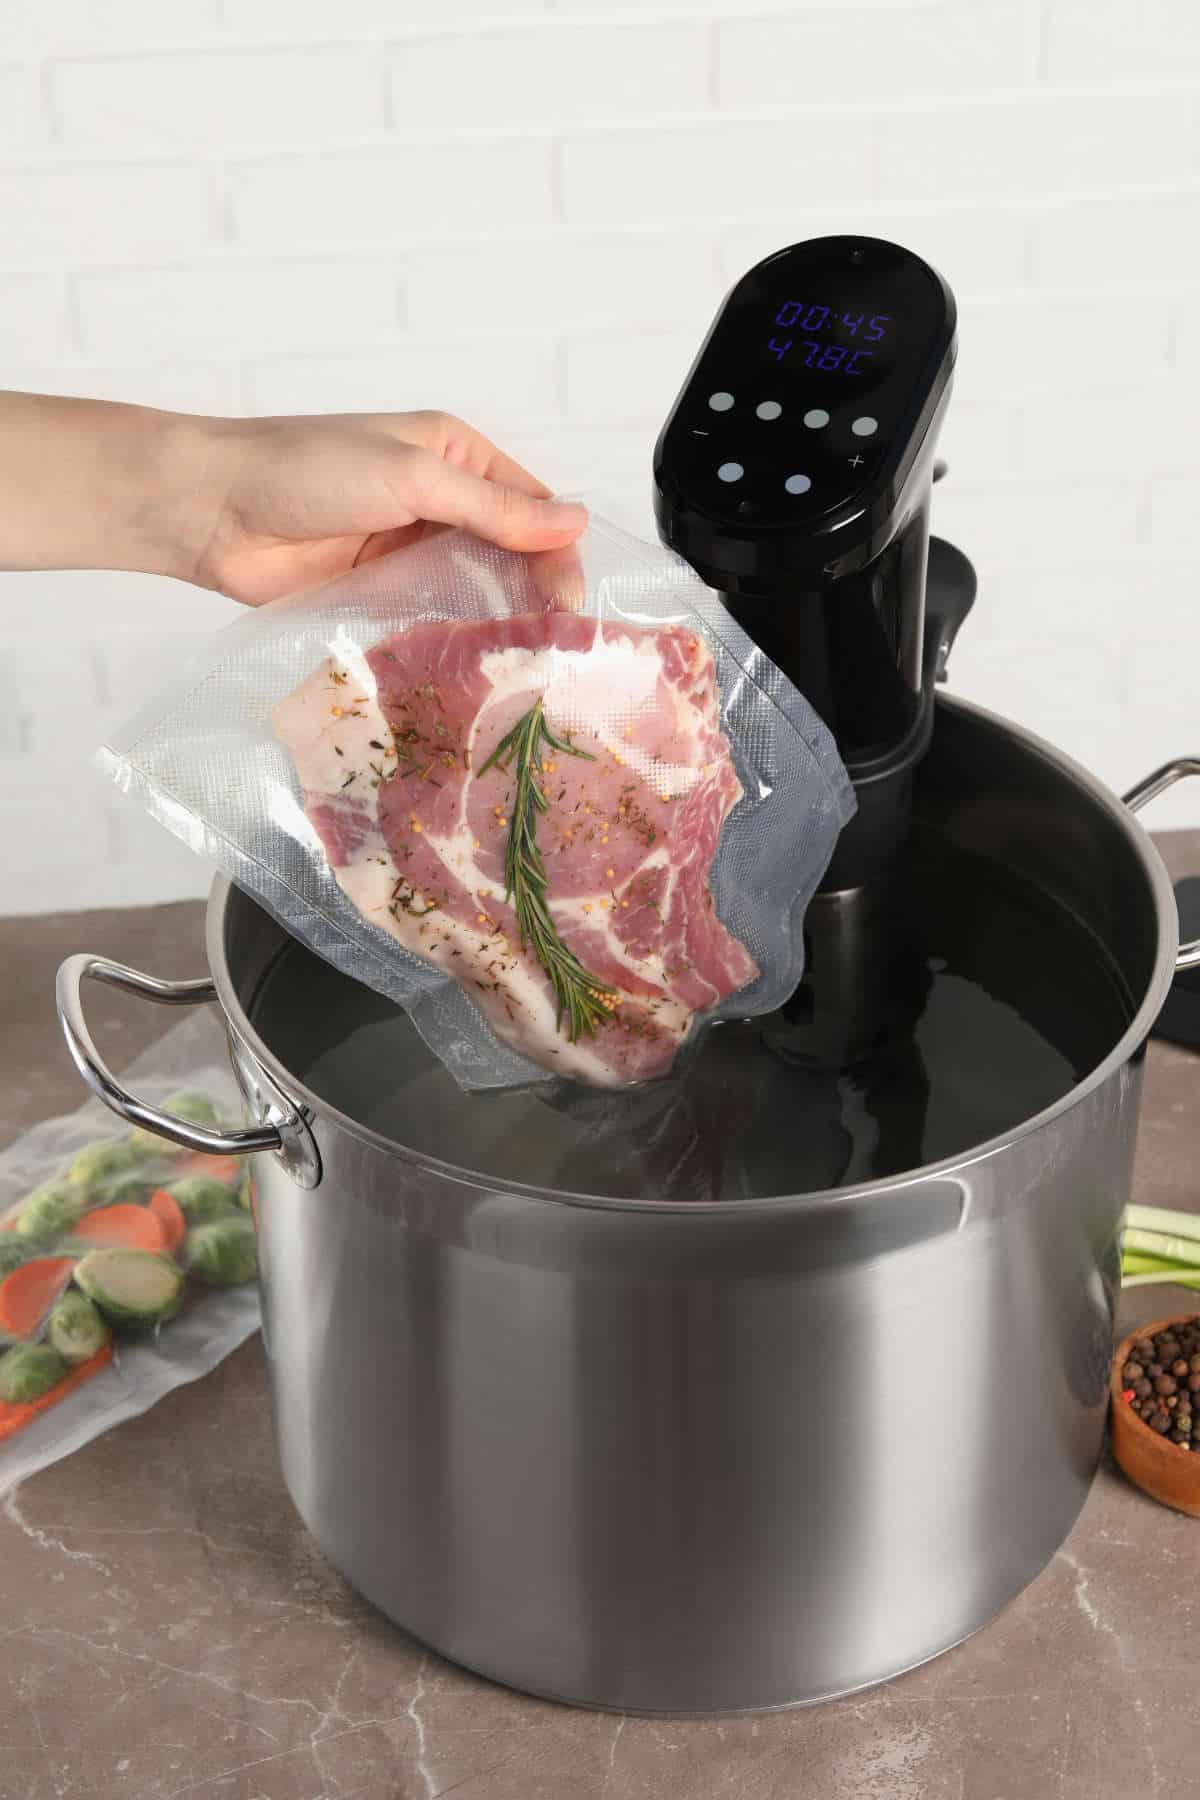 Woman putting vacuum packed meat into pot with sous vide cooker